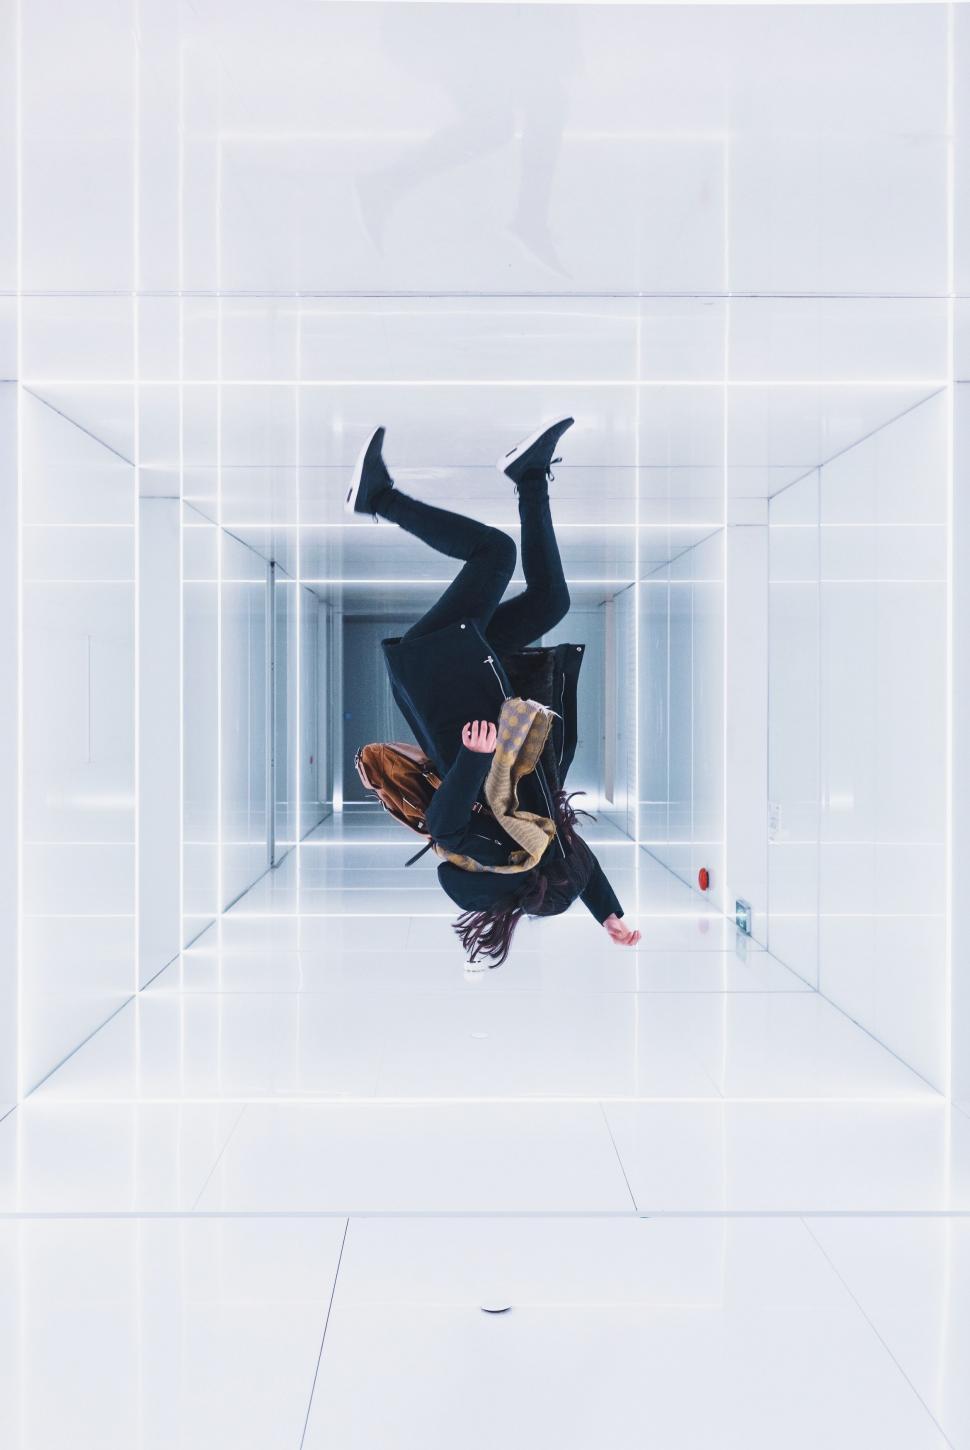 Free Image of Person in Black Suit Upside Down in White Room 